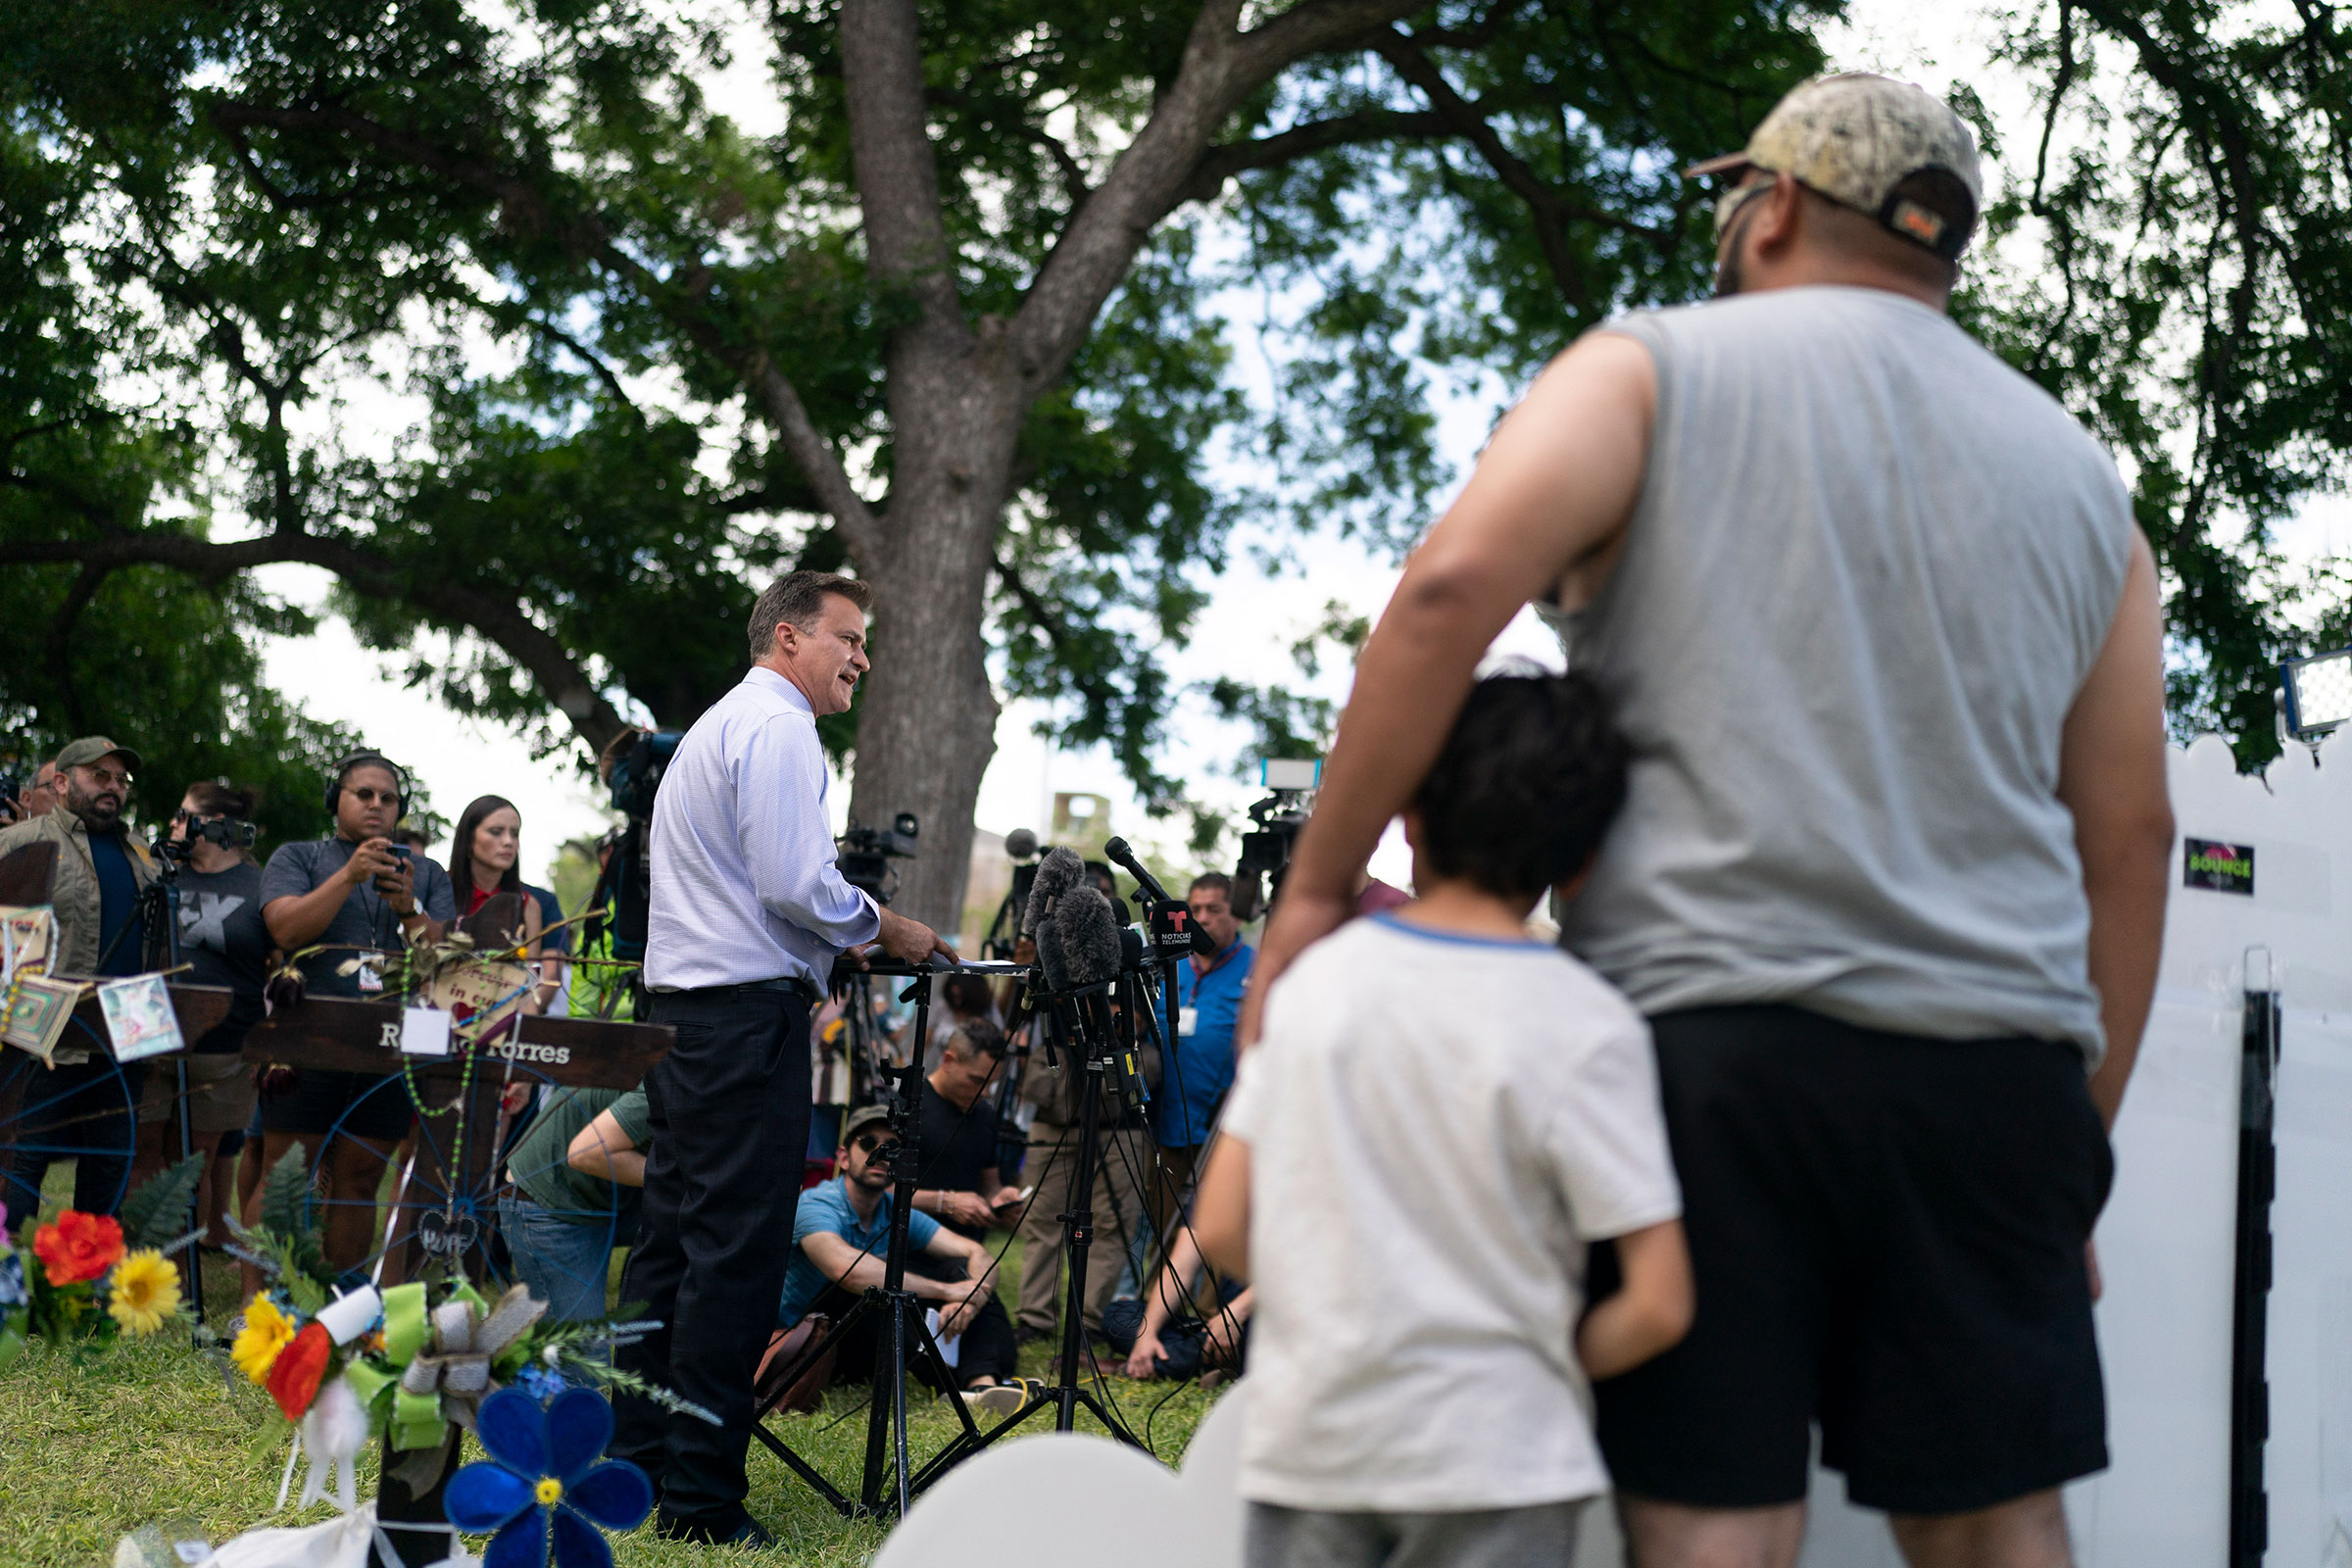 Texas state Sen. Roland Gutierrez speaks during a news conference at a town square in Uvalde, on June 2. (Jae C. Hong—AP)